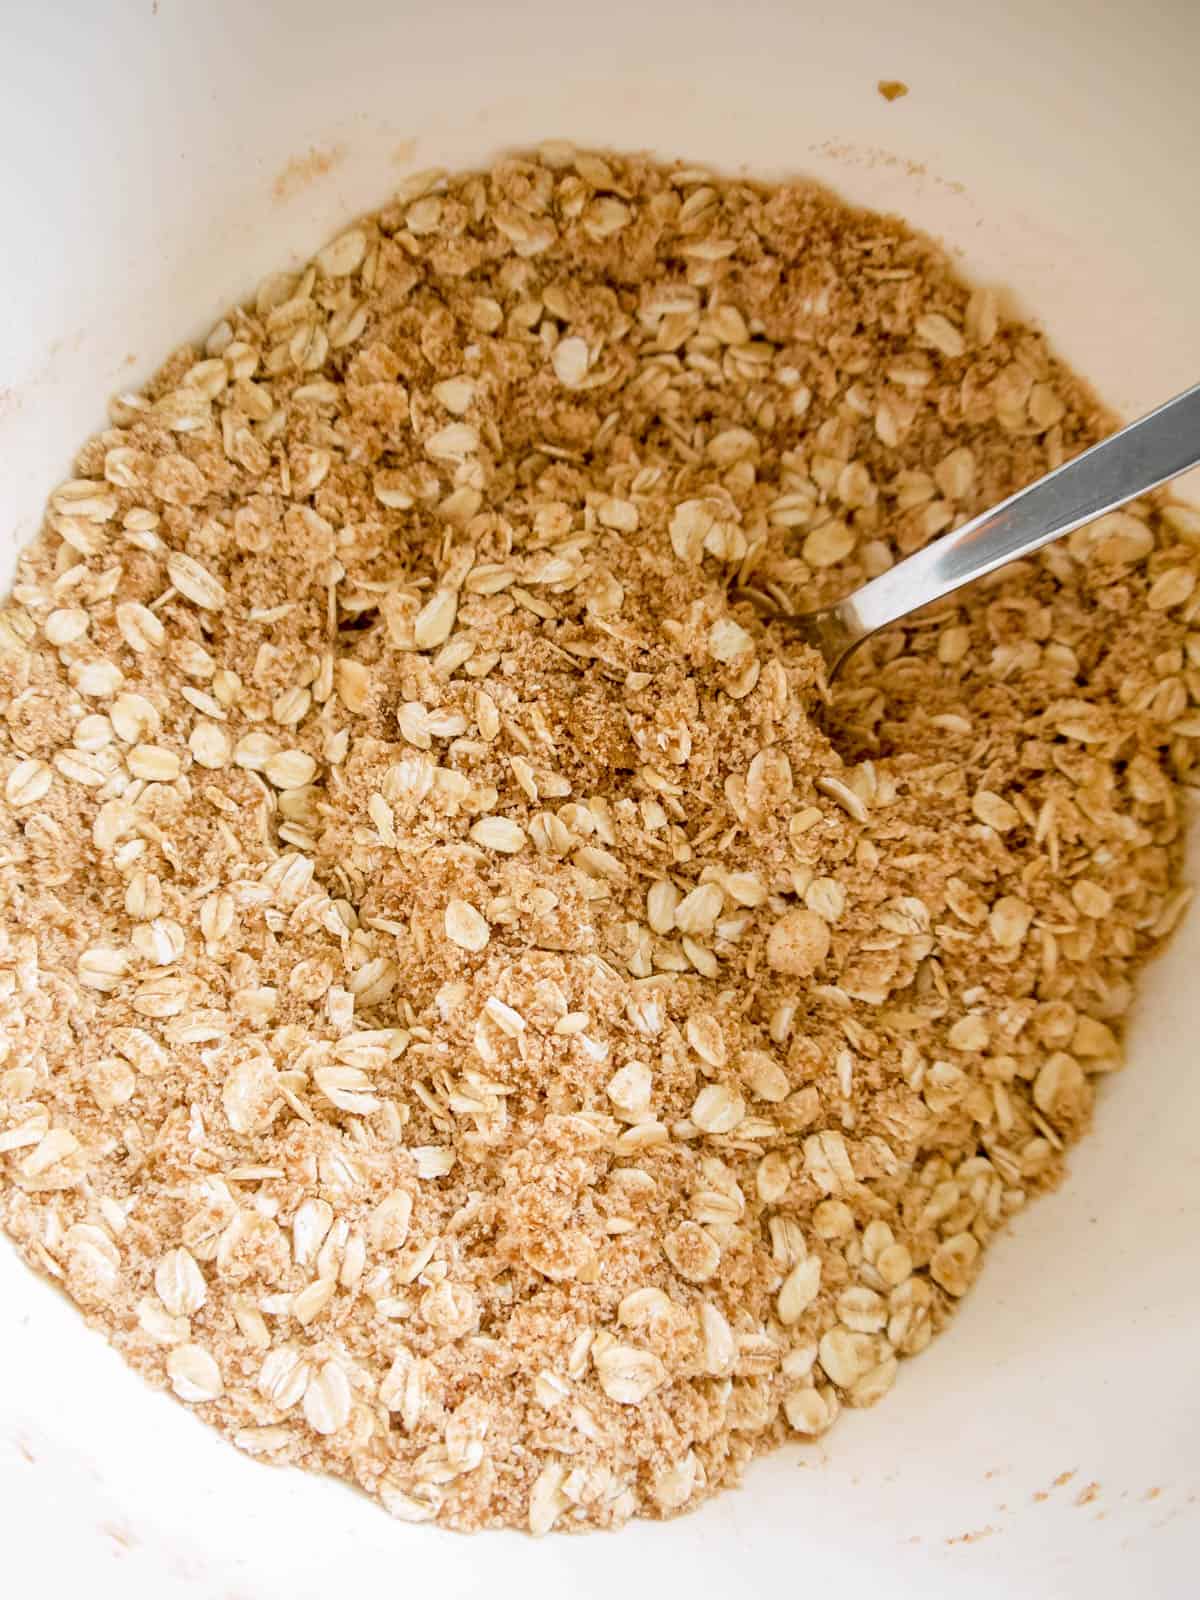 Almond and oat crisp topping mixed together in a bowl.